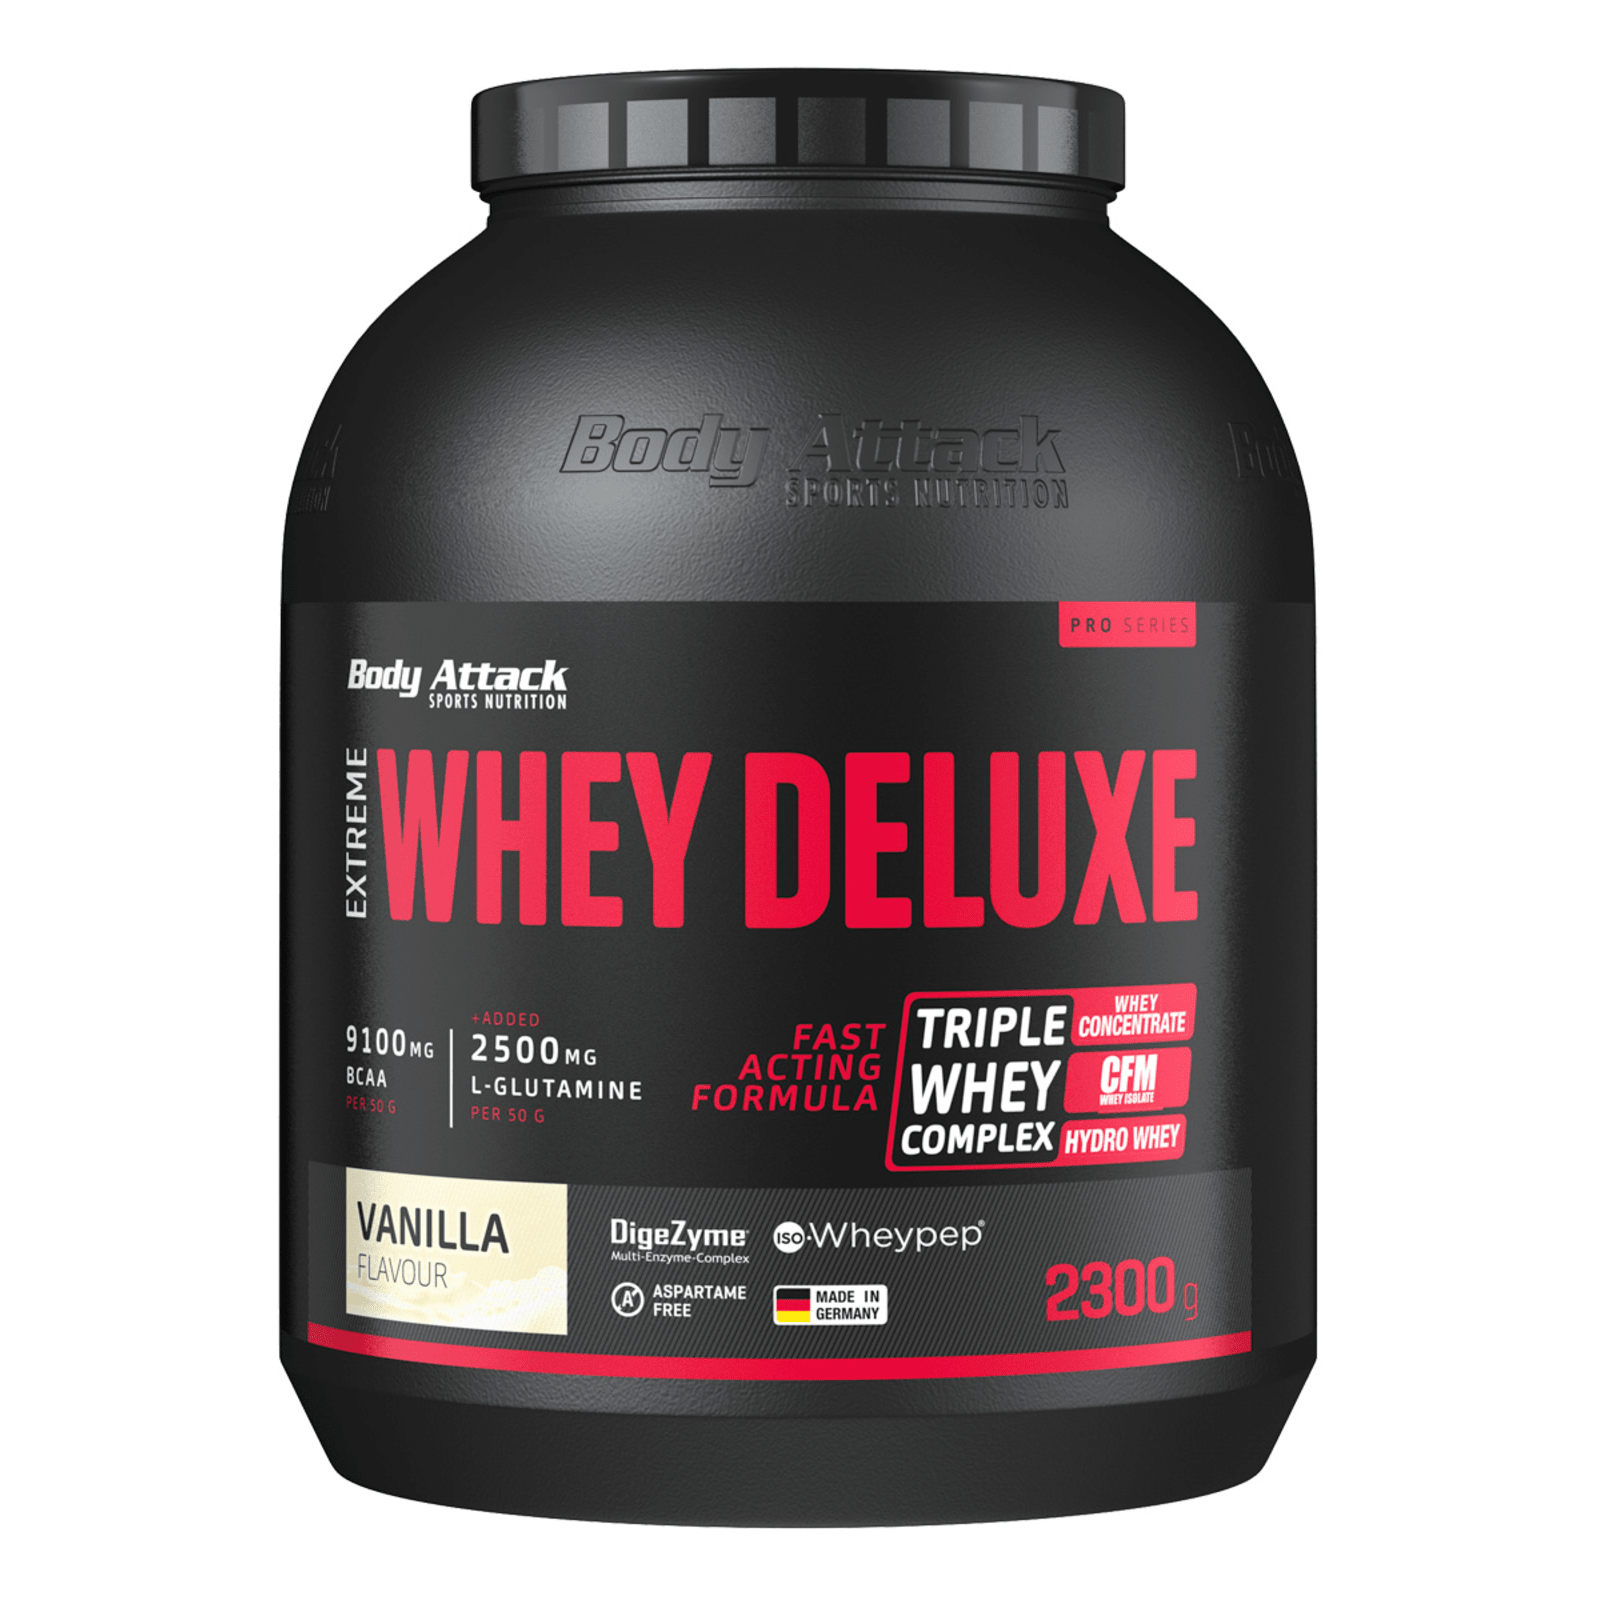 Body attack. Extreme Whey Deluxe. Протеин Whey Deluxe body Attack. Gold Whey 3kg. Extreme Whey Protein.